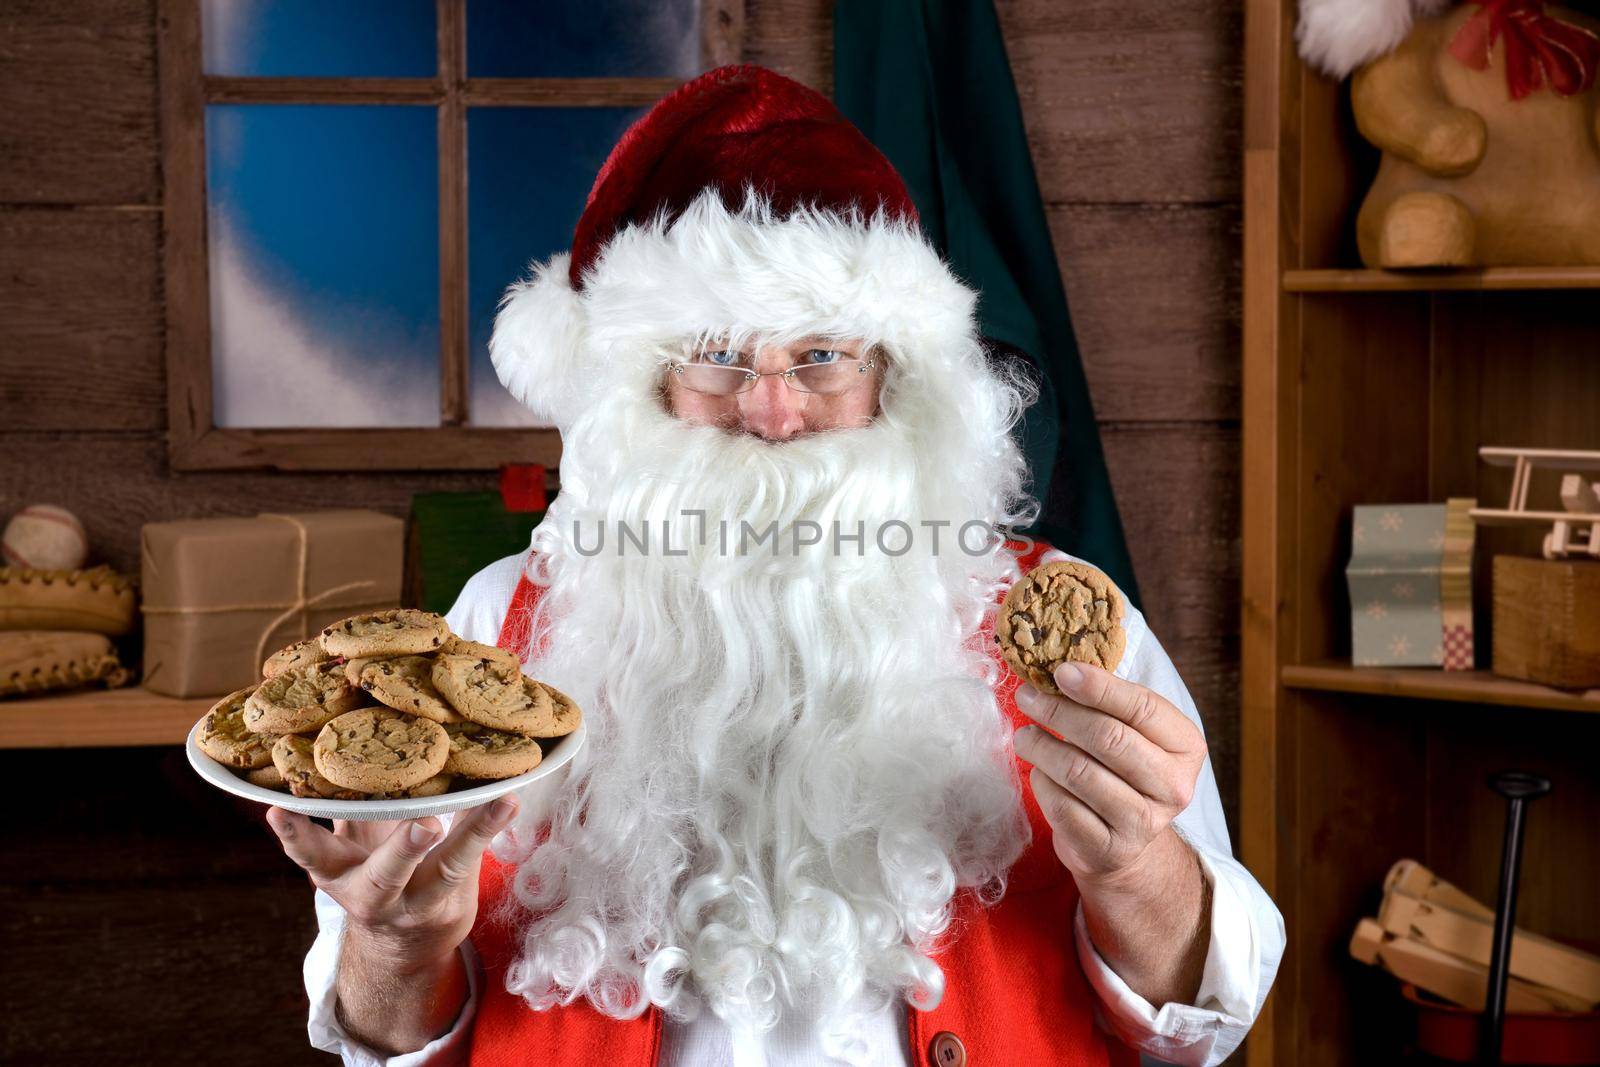 Santa Claus in his workshop holding a plate full of fresh baked Chocolate Chip cookie by sCukrov